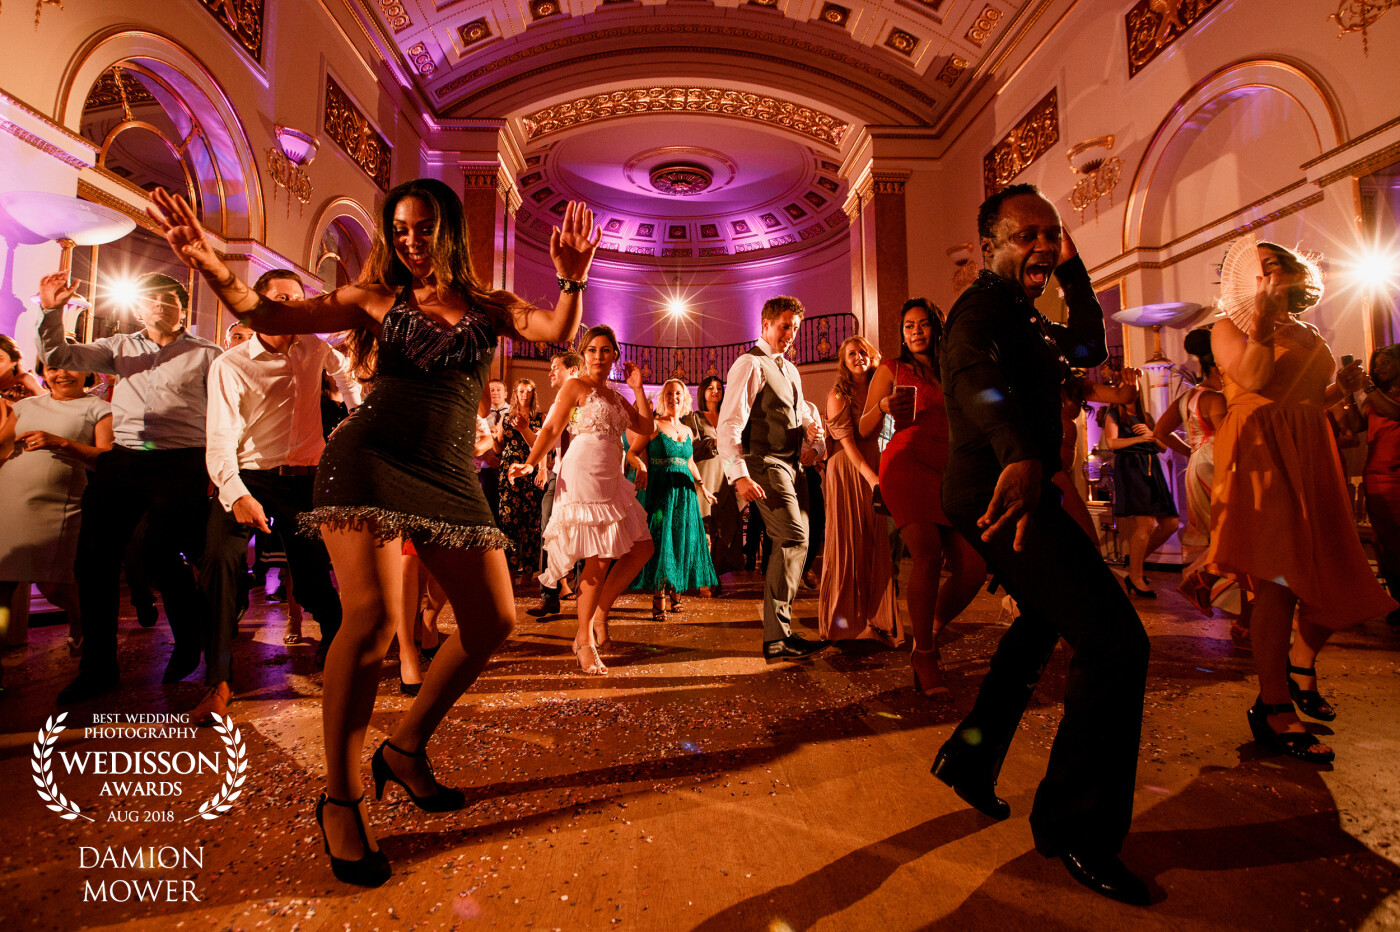 Rhalina and Toby's wedding in London was a blend of cultures as the bride and groom took to the dance floor for some latino dancing lessons.